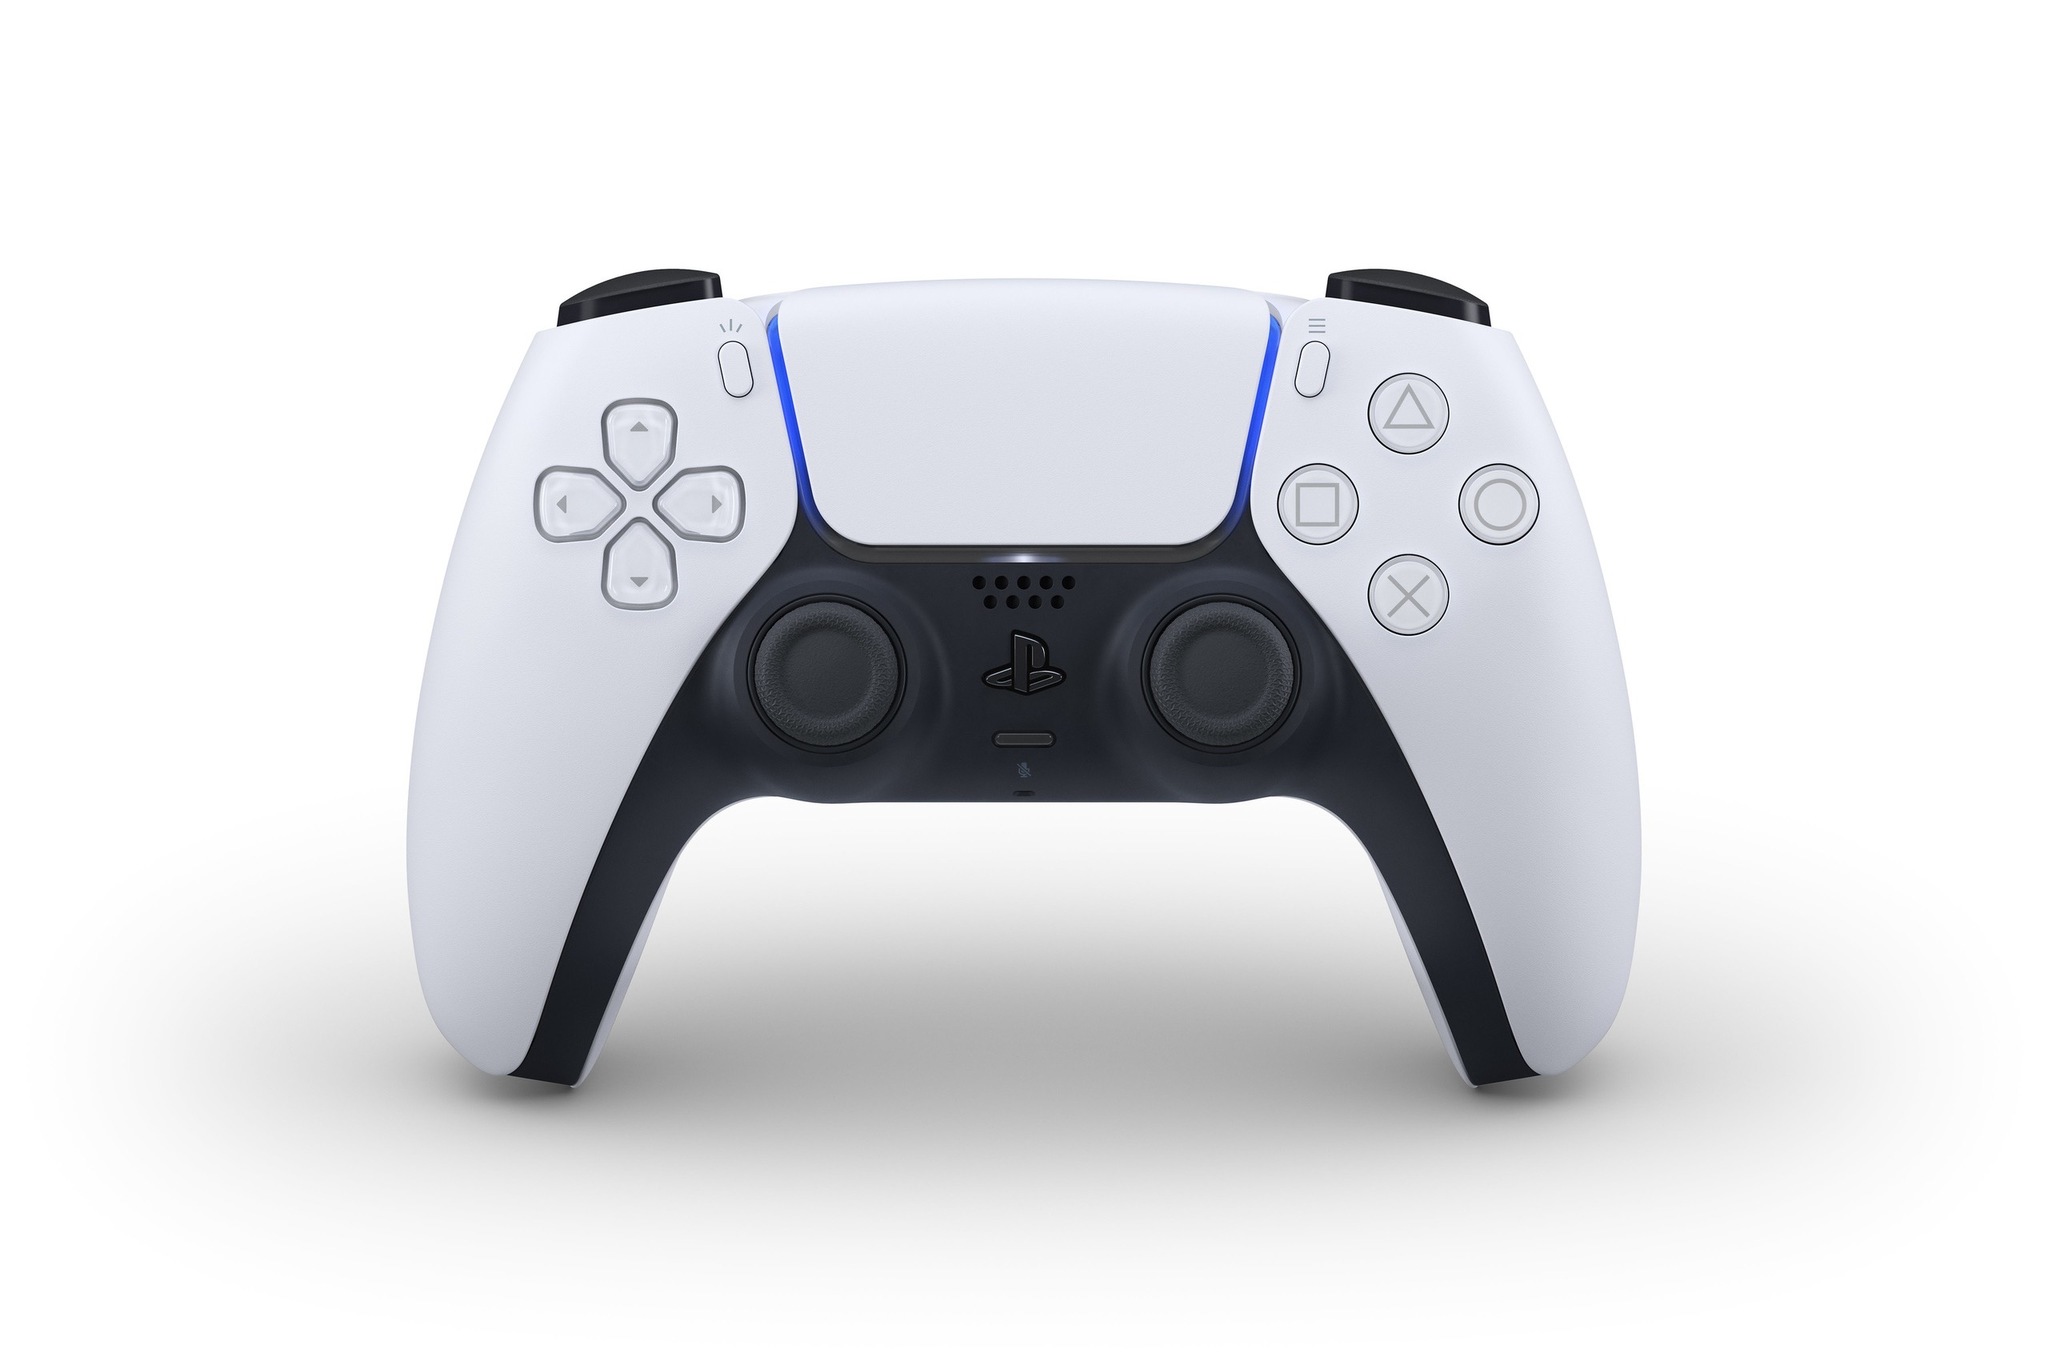 Reply to the post “Sony showed off a gamepad for PS5” - Sony, Playstation, Gamepad, Playstation 5, Reply to post